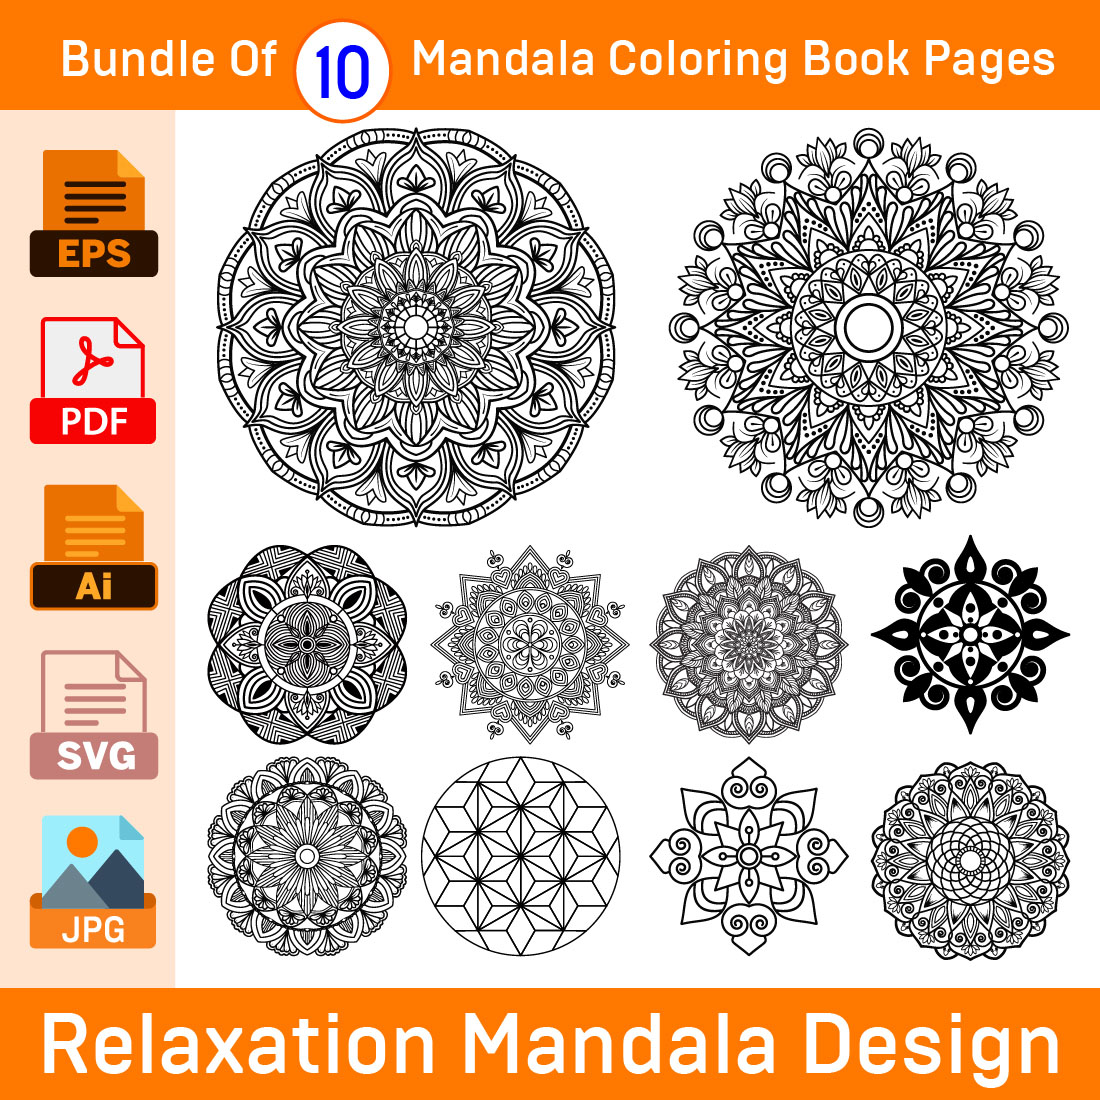 Bundle of 10 Relaxation Mandalas Coloring Book Pages cover image.